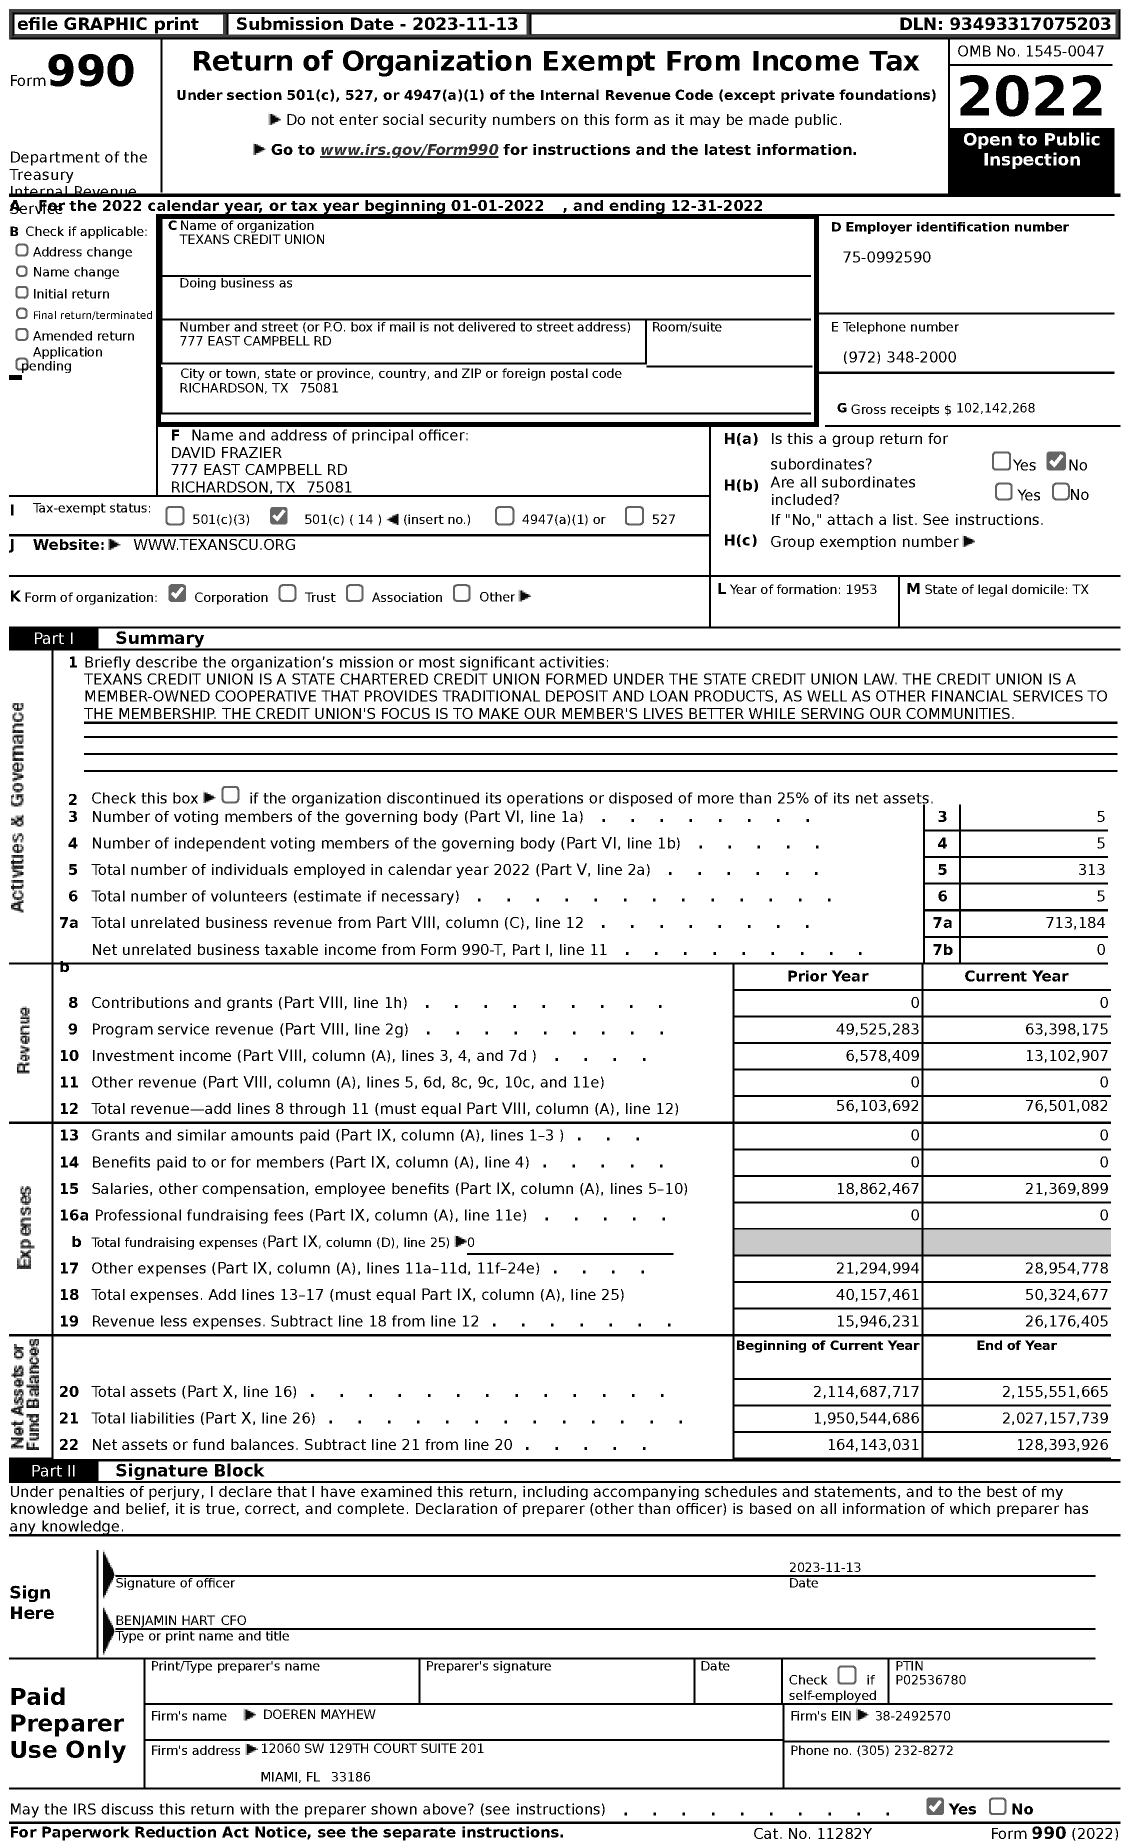 Image of first page of 2022 Form 990 for Texans Credit Union